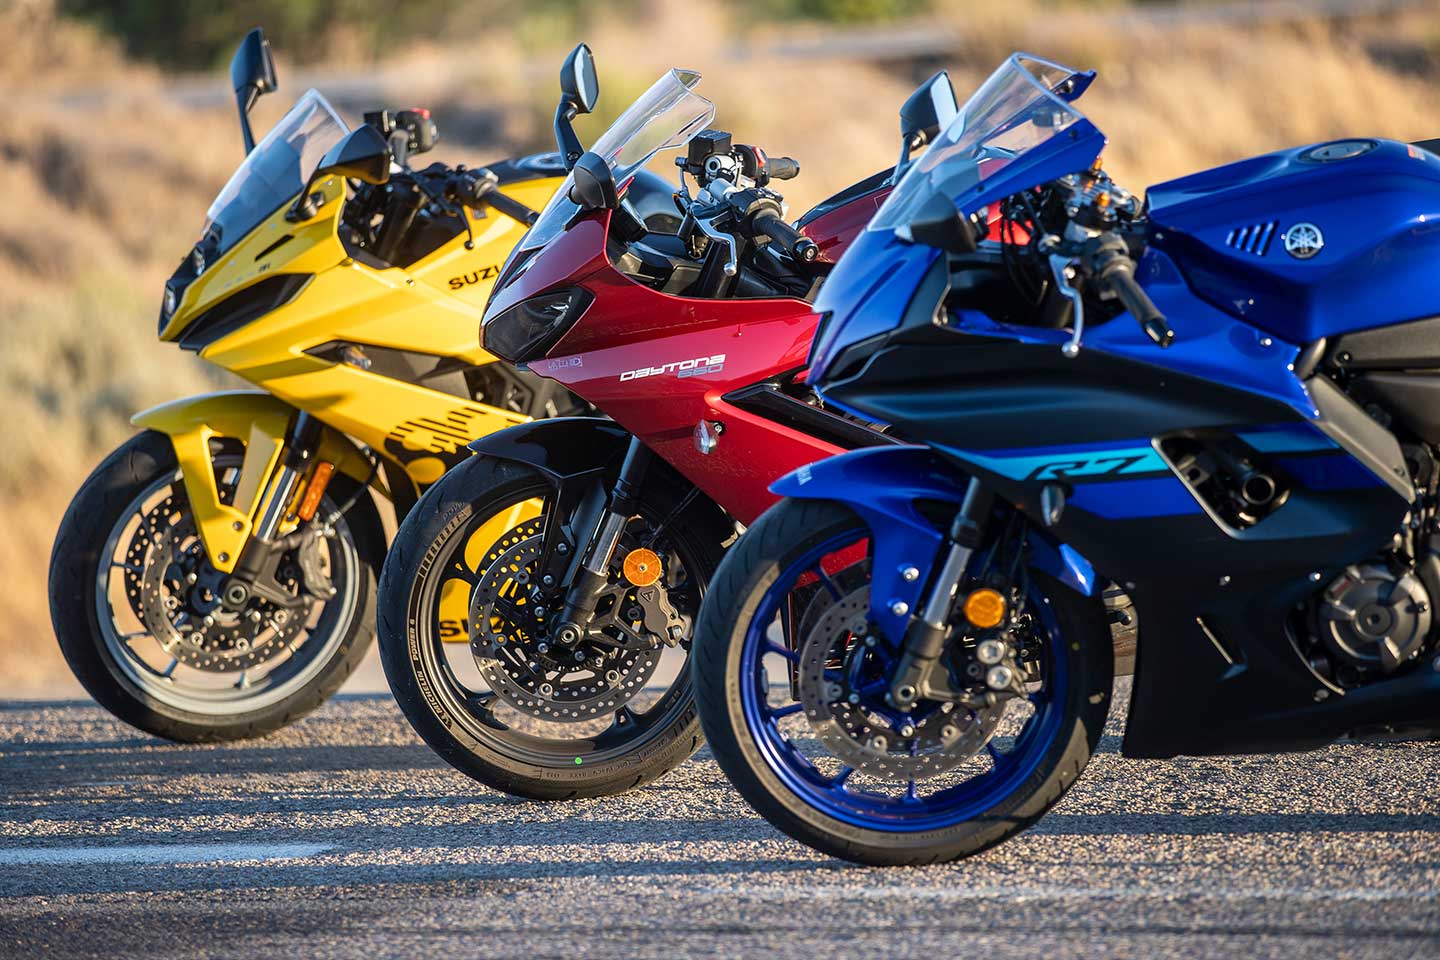 Our class of 2024 Middleweight Sportbike Comparison includes the Suzuki GSX-8R, Triumph Daytona 660, and Yamaha YZF-R7.